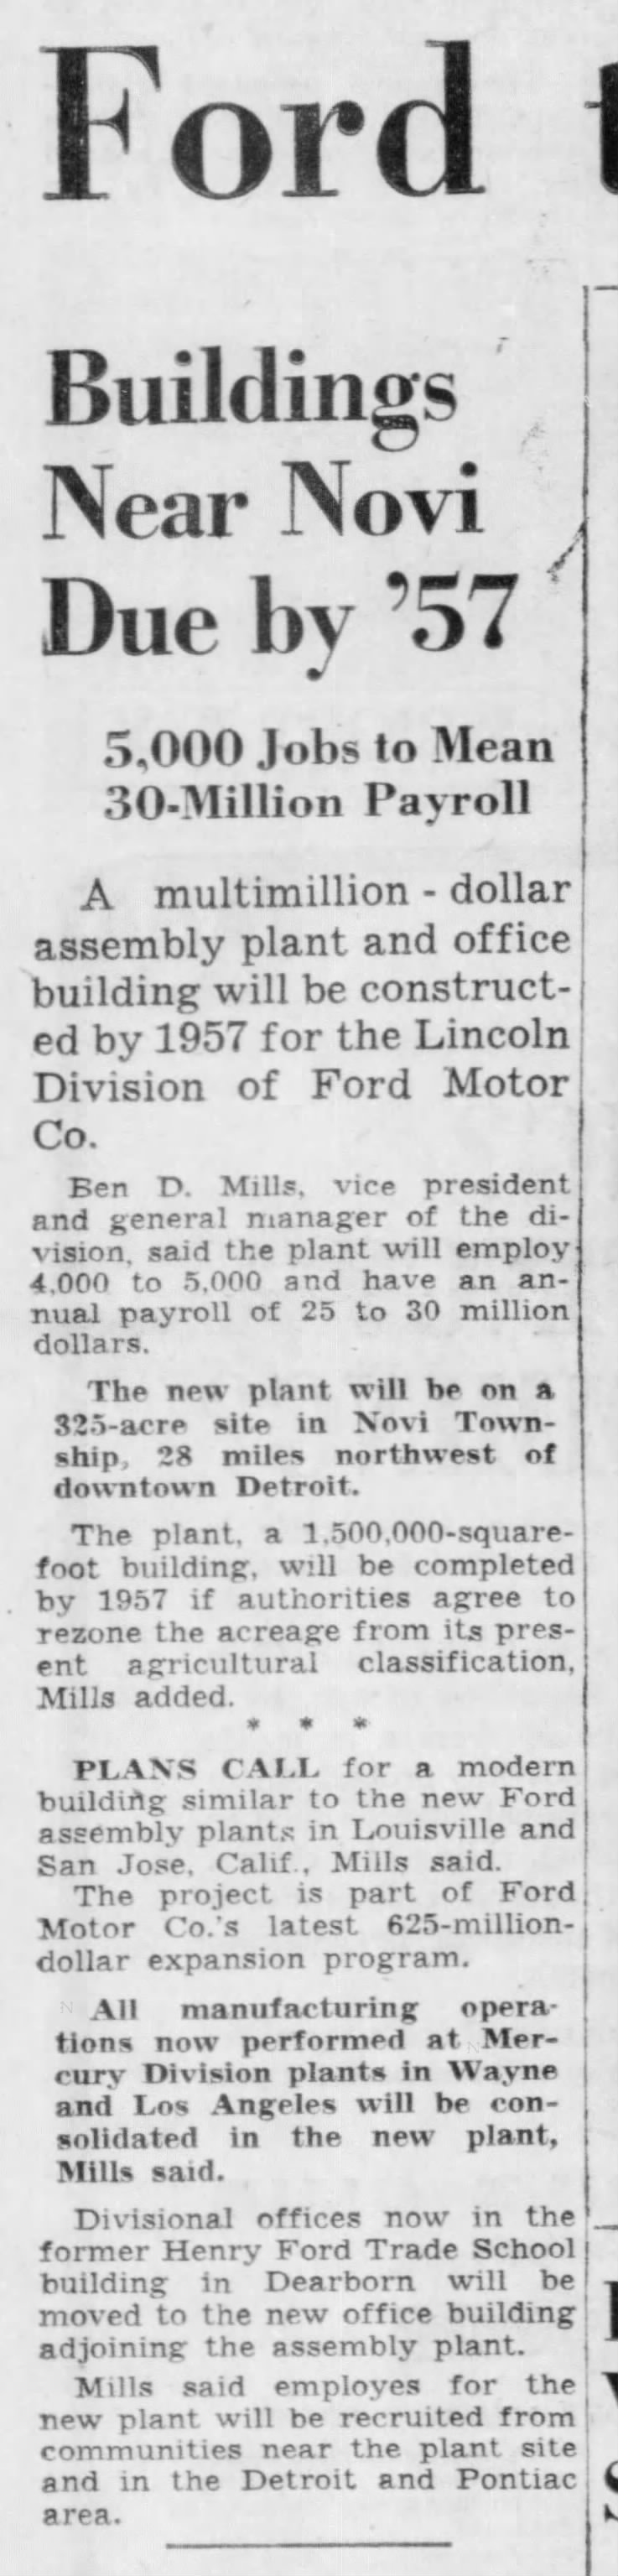 Ford To Build Huge Lincoln Plant: Buildings Near Novi Due by '57